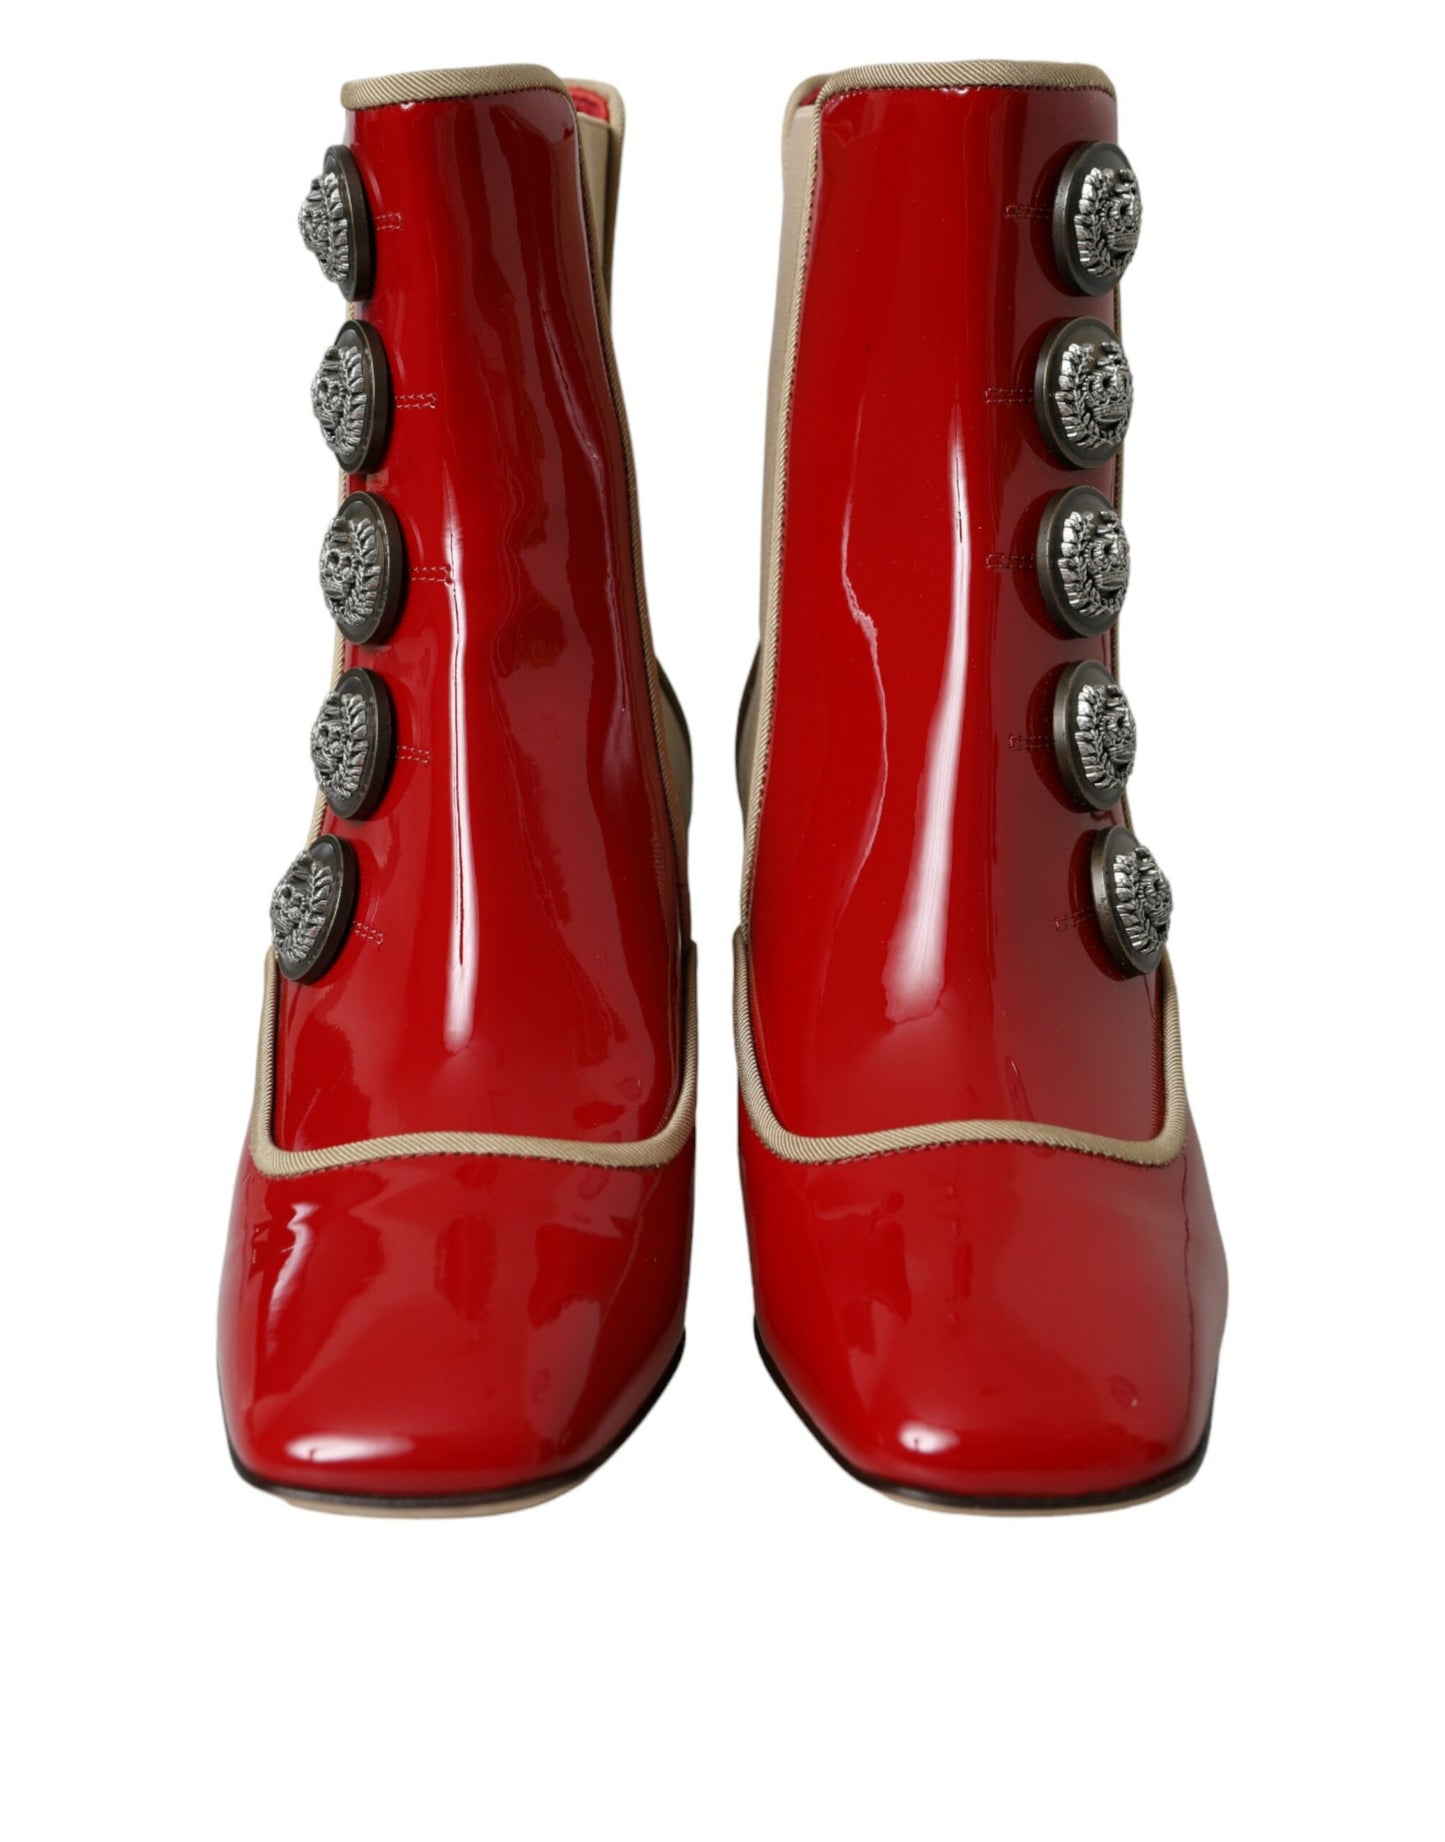 Red Beige Leather Embellished Mid Calf Boots Shoes